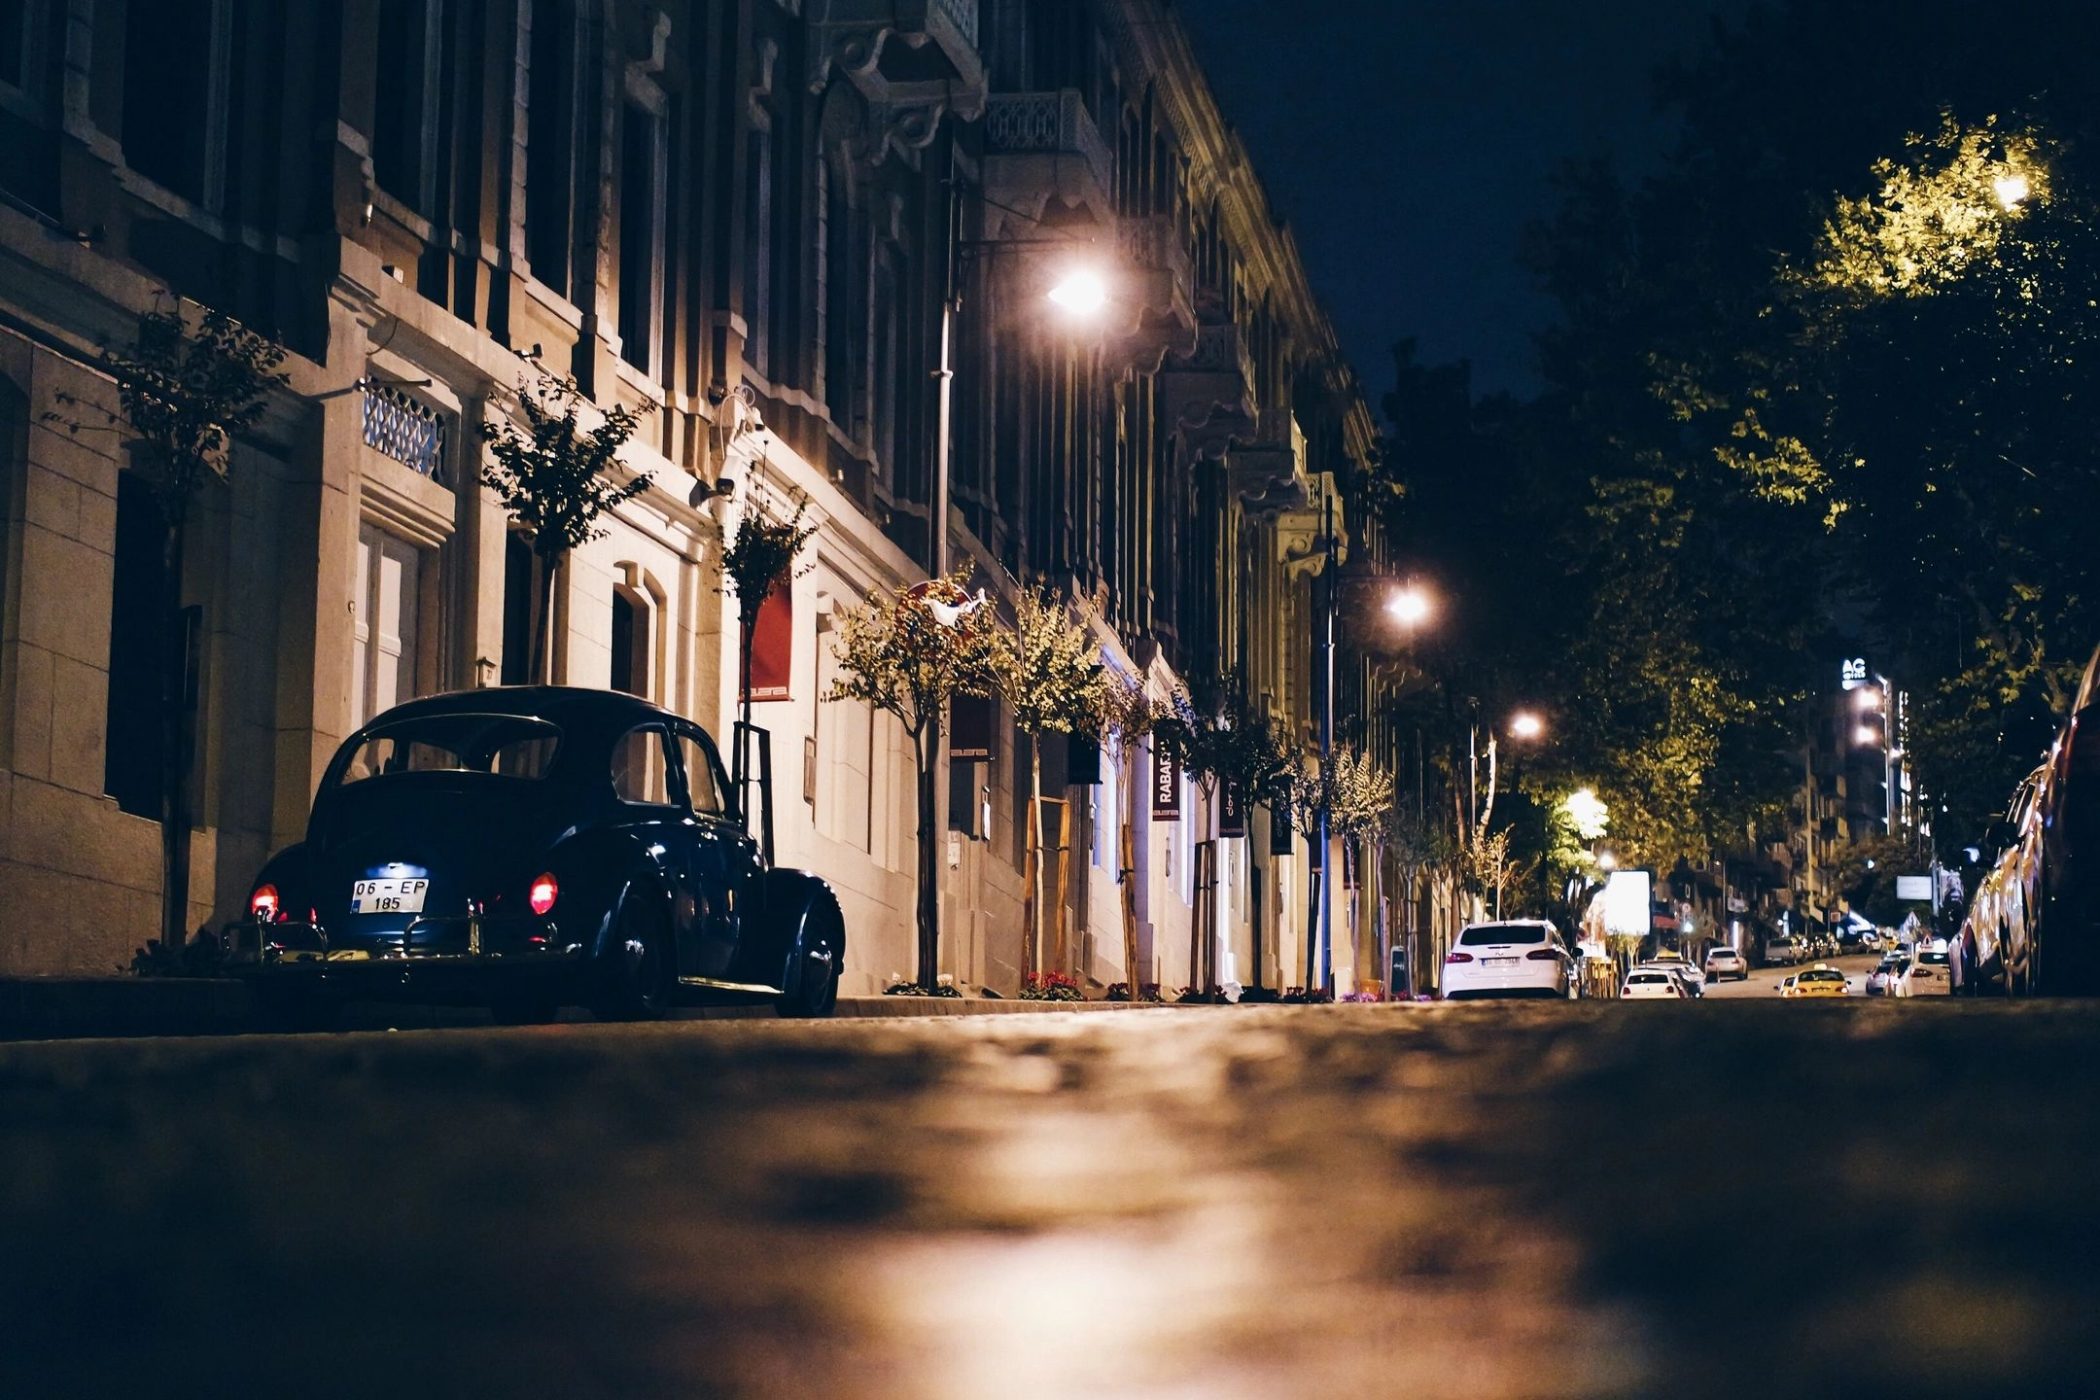 Nighttime image of street and car like that in post by DC widow blog writer Marjorie Brimley